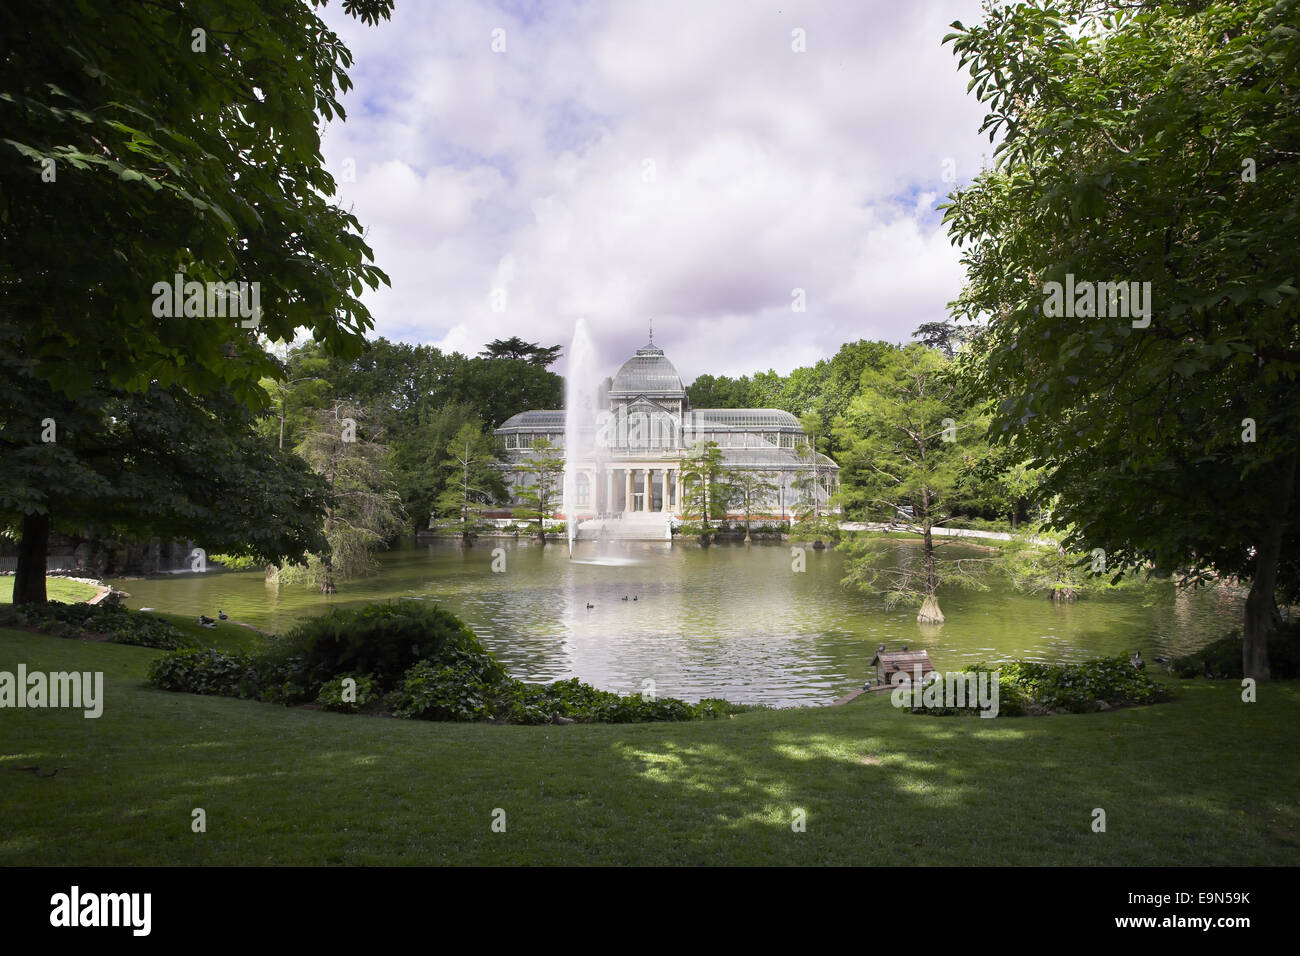 The well-known Crystal palace Stock Photo